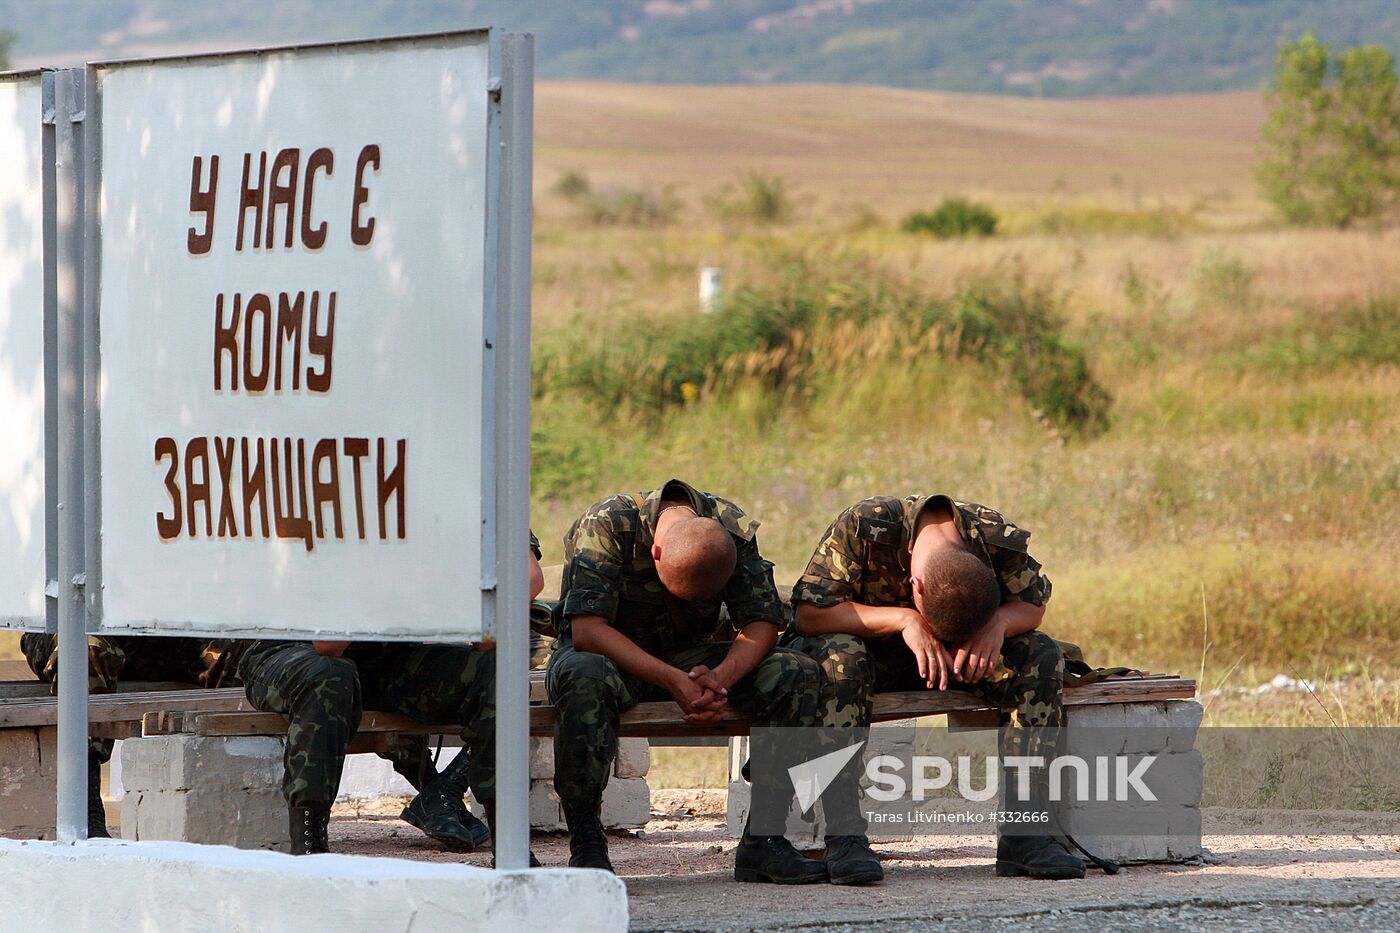 Ukrainian armed forces' military drills